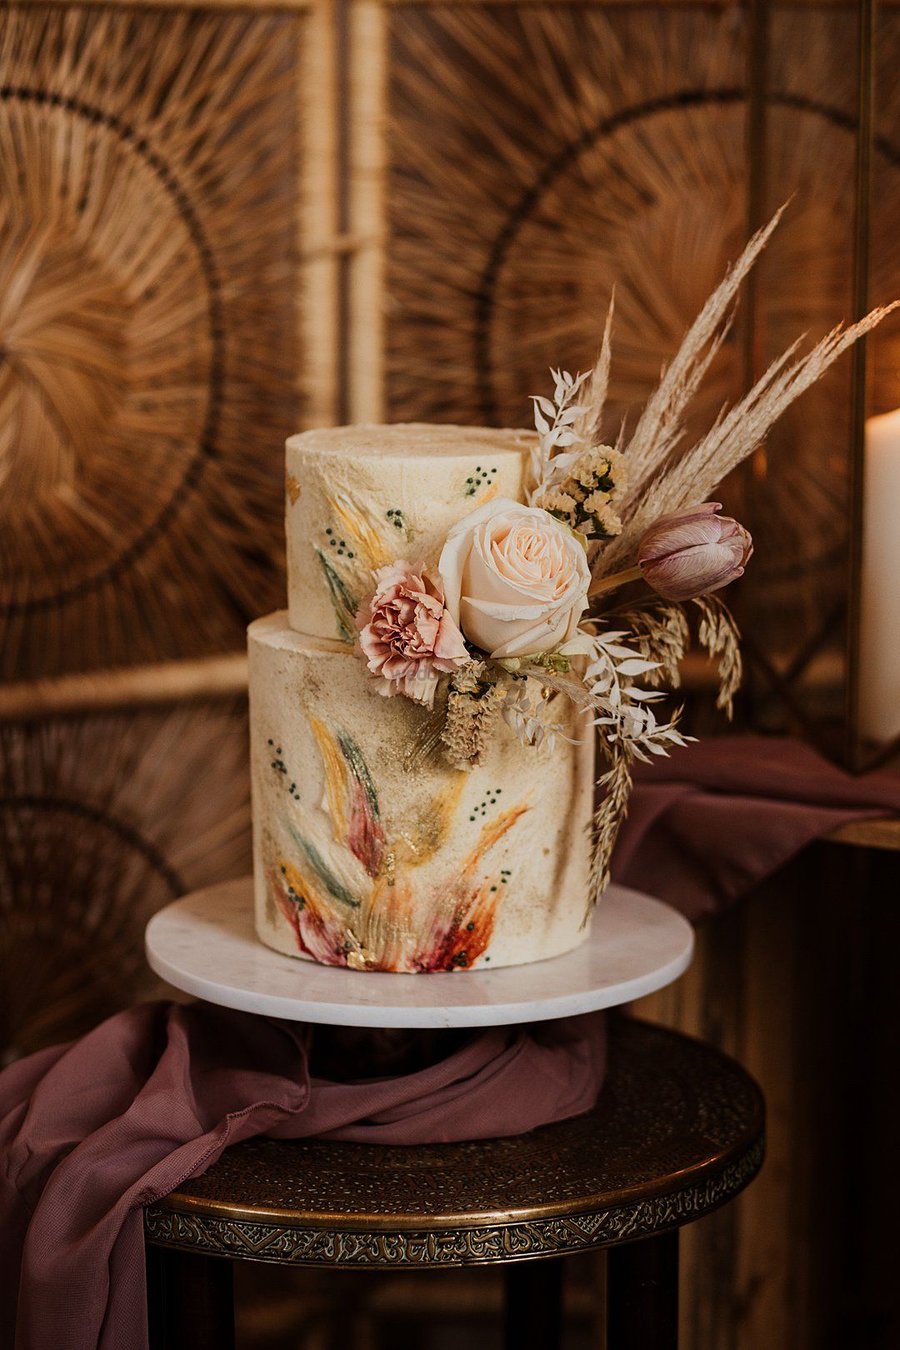 Romantic Rustic Floral Design Wedding Cake On Table Outdoors Photograph by  JM Travel Photography - Fine Art America